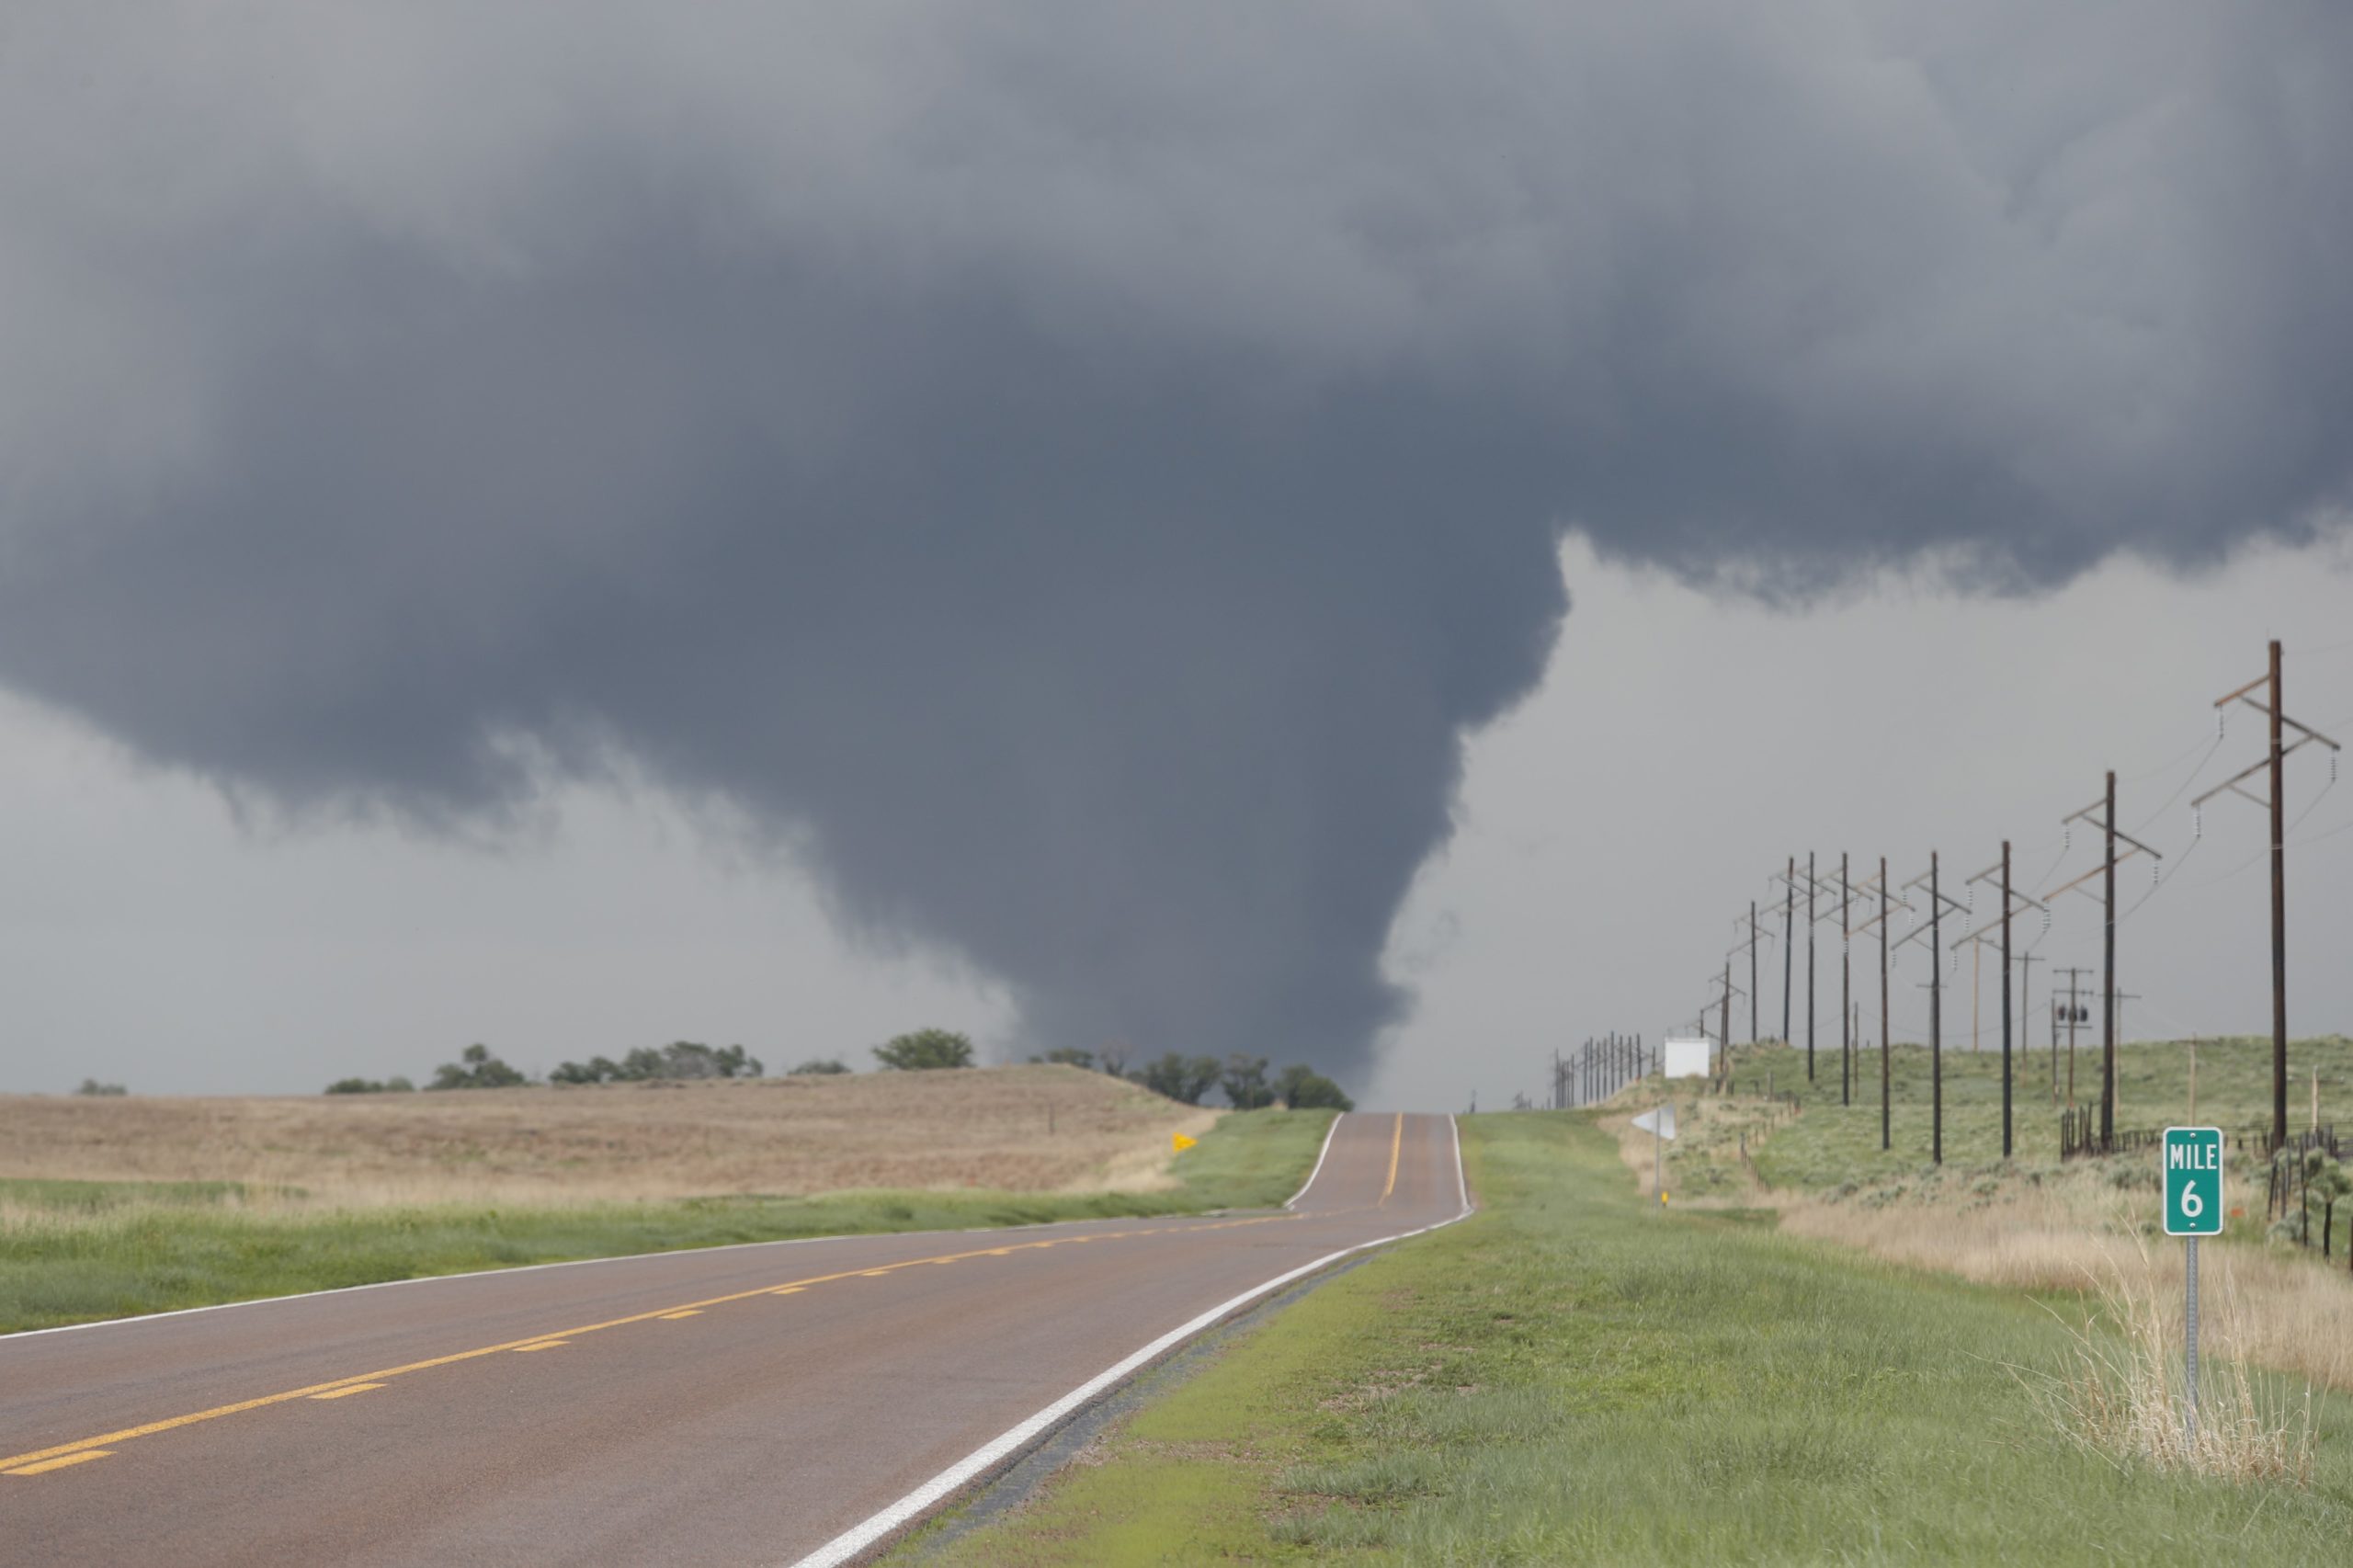 A tornado in Nebraska in 2021. No injuries or deaths were reported as a result of this tornado.